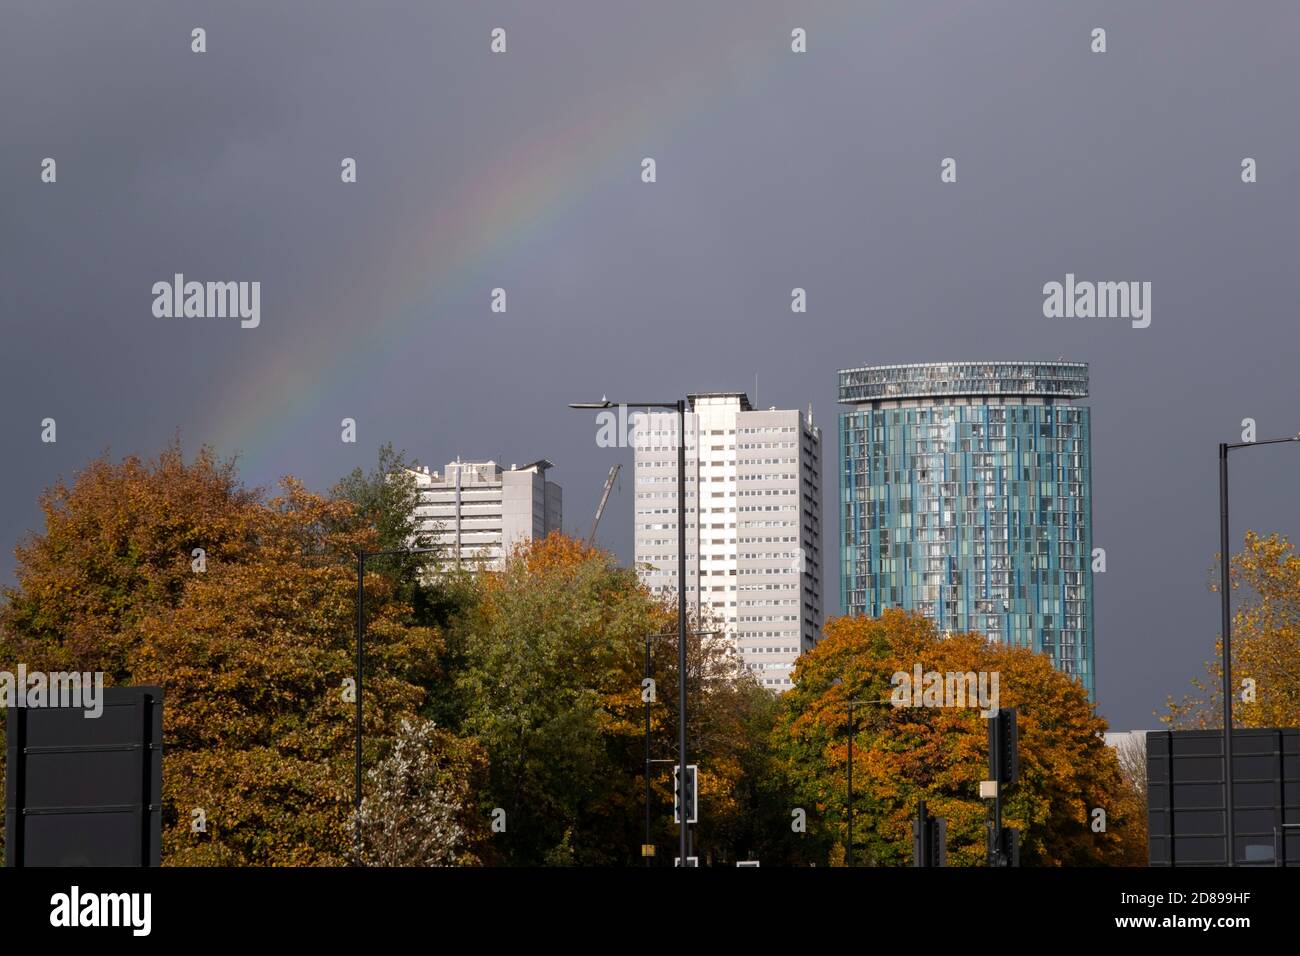 Rainbow over the Radisson Hotel In Birmingham on 26th October 2020 in Birmingham, United Kingdom. Radisson Hotels is an international hotel chain headquartered in the United States and owned by Jin Jiang International Holdings Co. Stock Photo